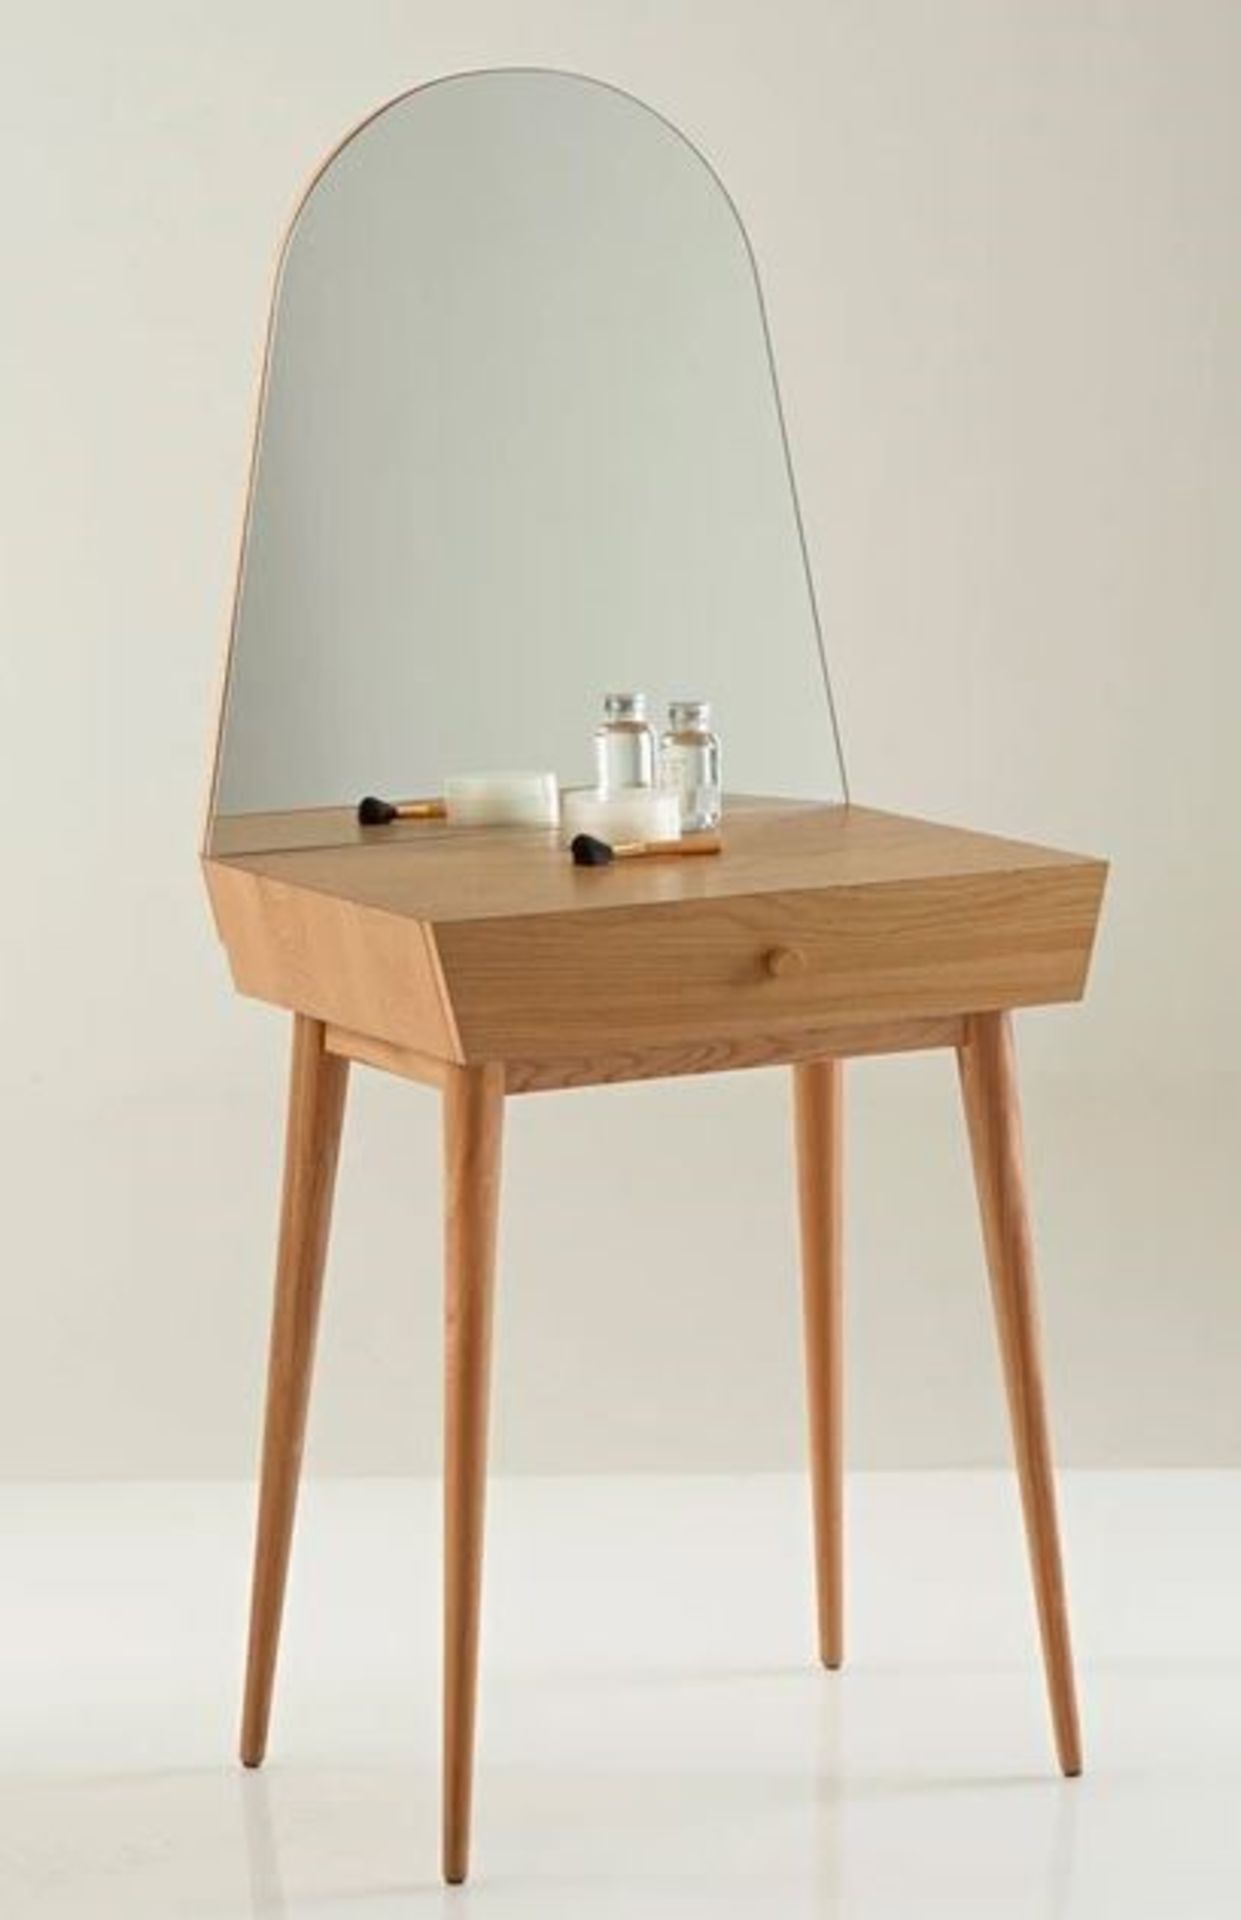 1 GRADE B BOXED DESIGNER CLAIROY 1 DRAWER SCANDI-STYLE DRESSING TABLE IN OAK / RRP £165.00 (PUBLIC